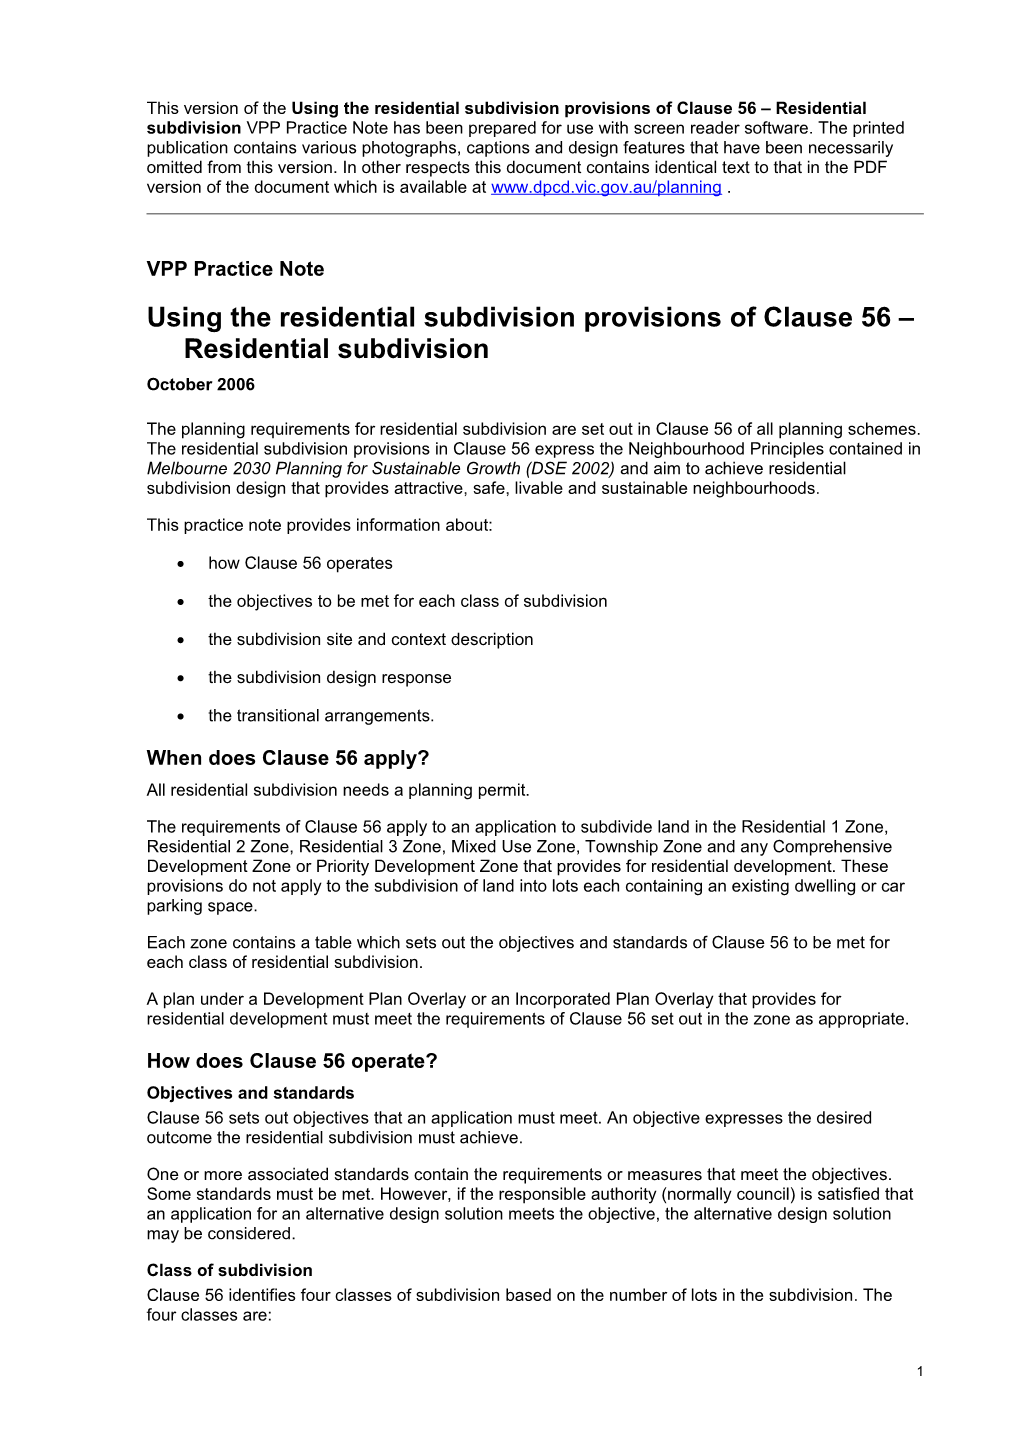 Planning Practice Note 40: Using the Residential Subdivision Provisions of Clause 56 Residential